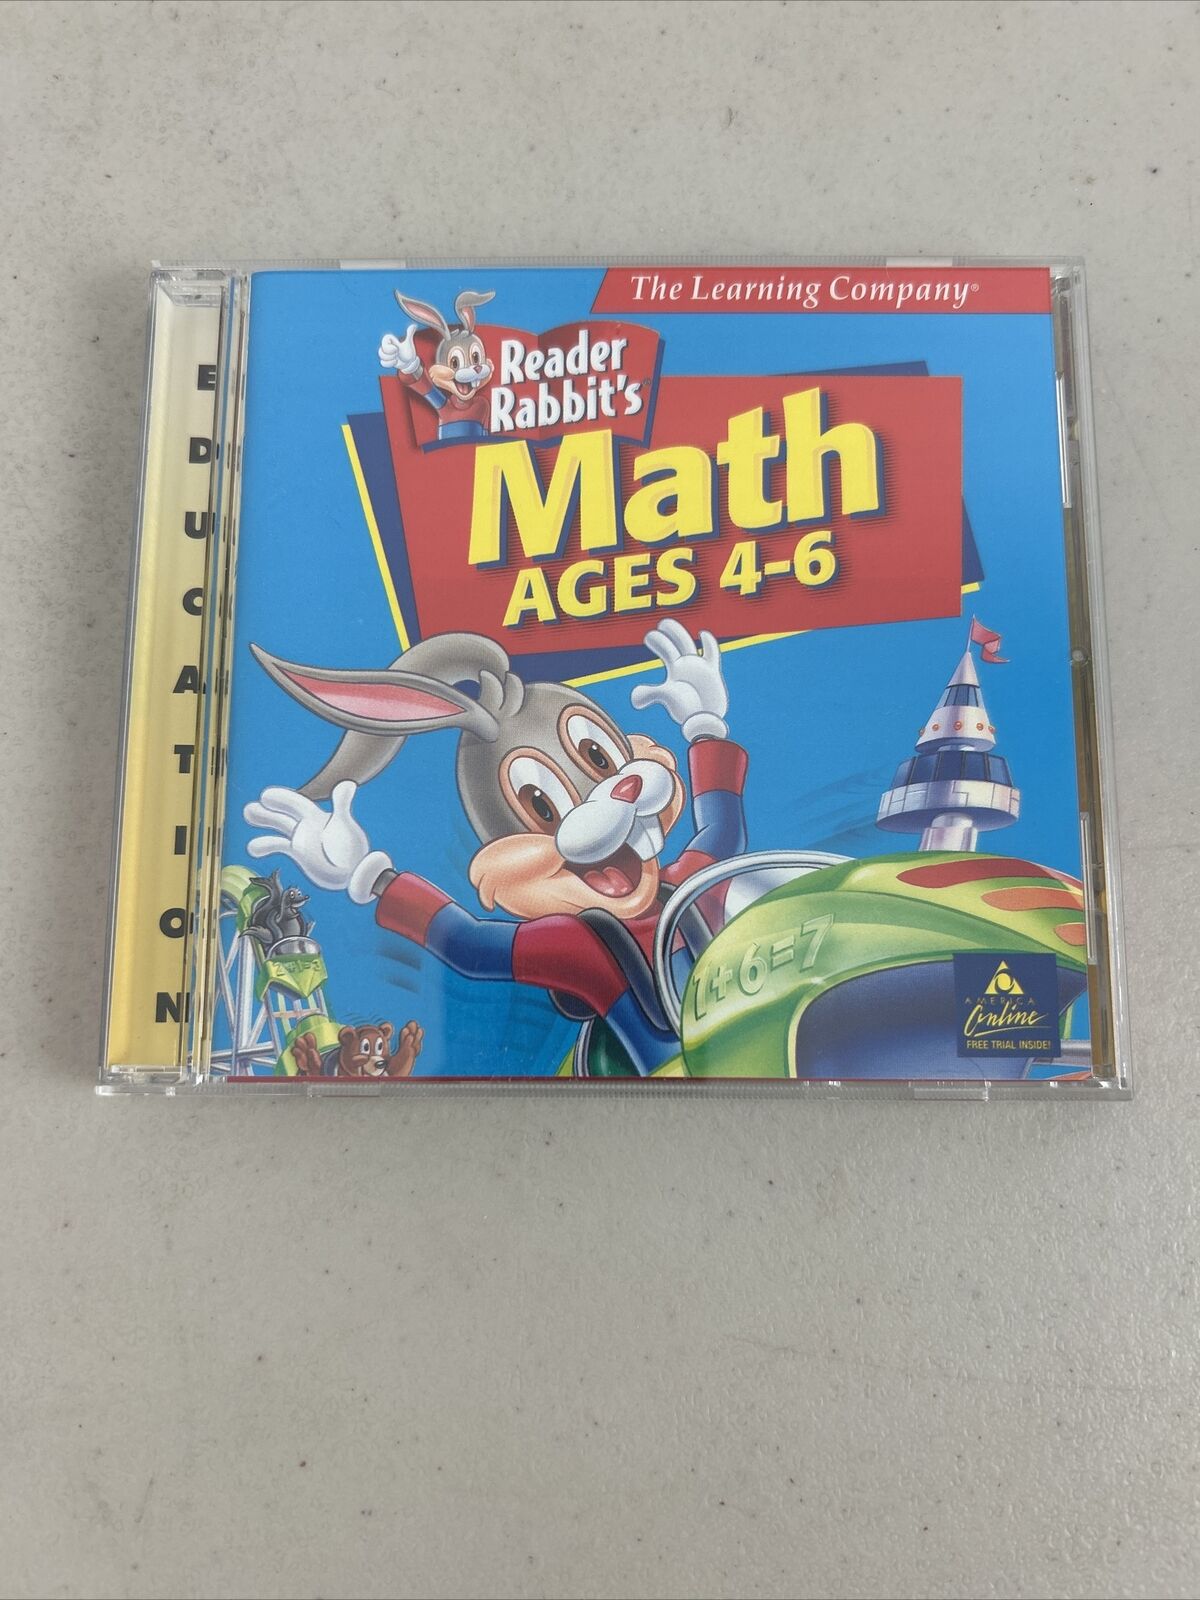 Reader Rabbit Math & READING Ages 4-6 Award Winning The Learning Company 